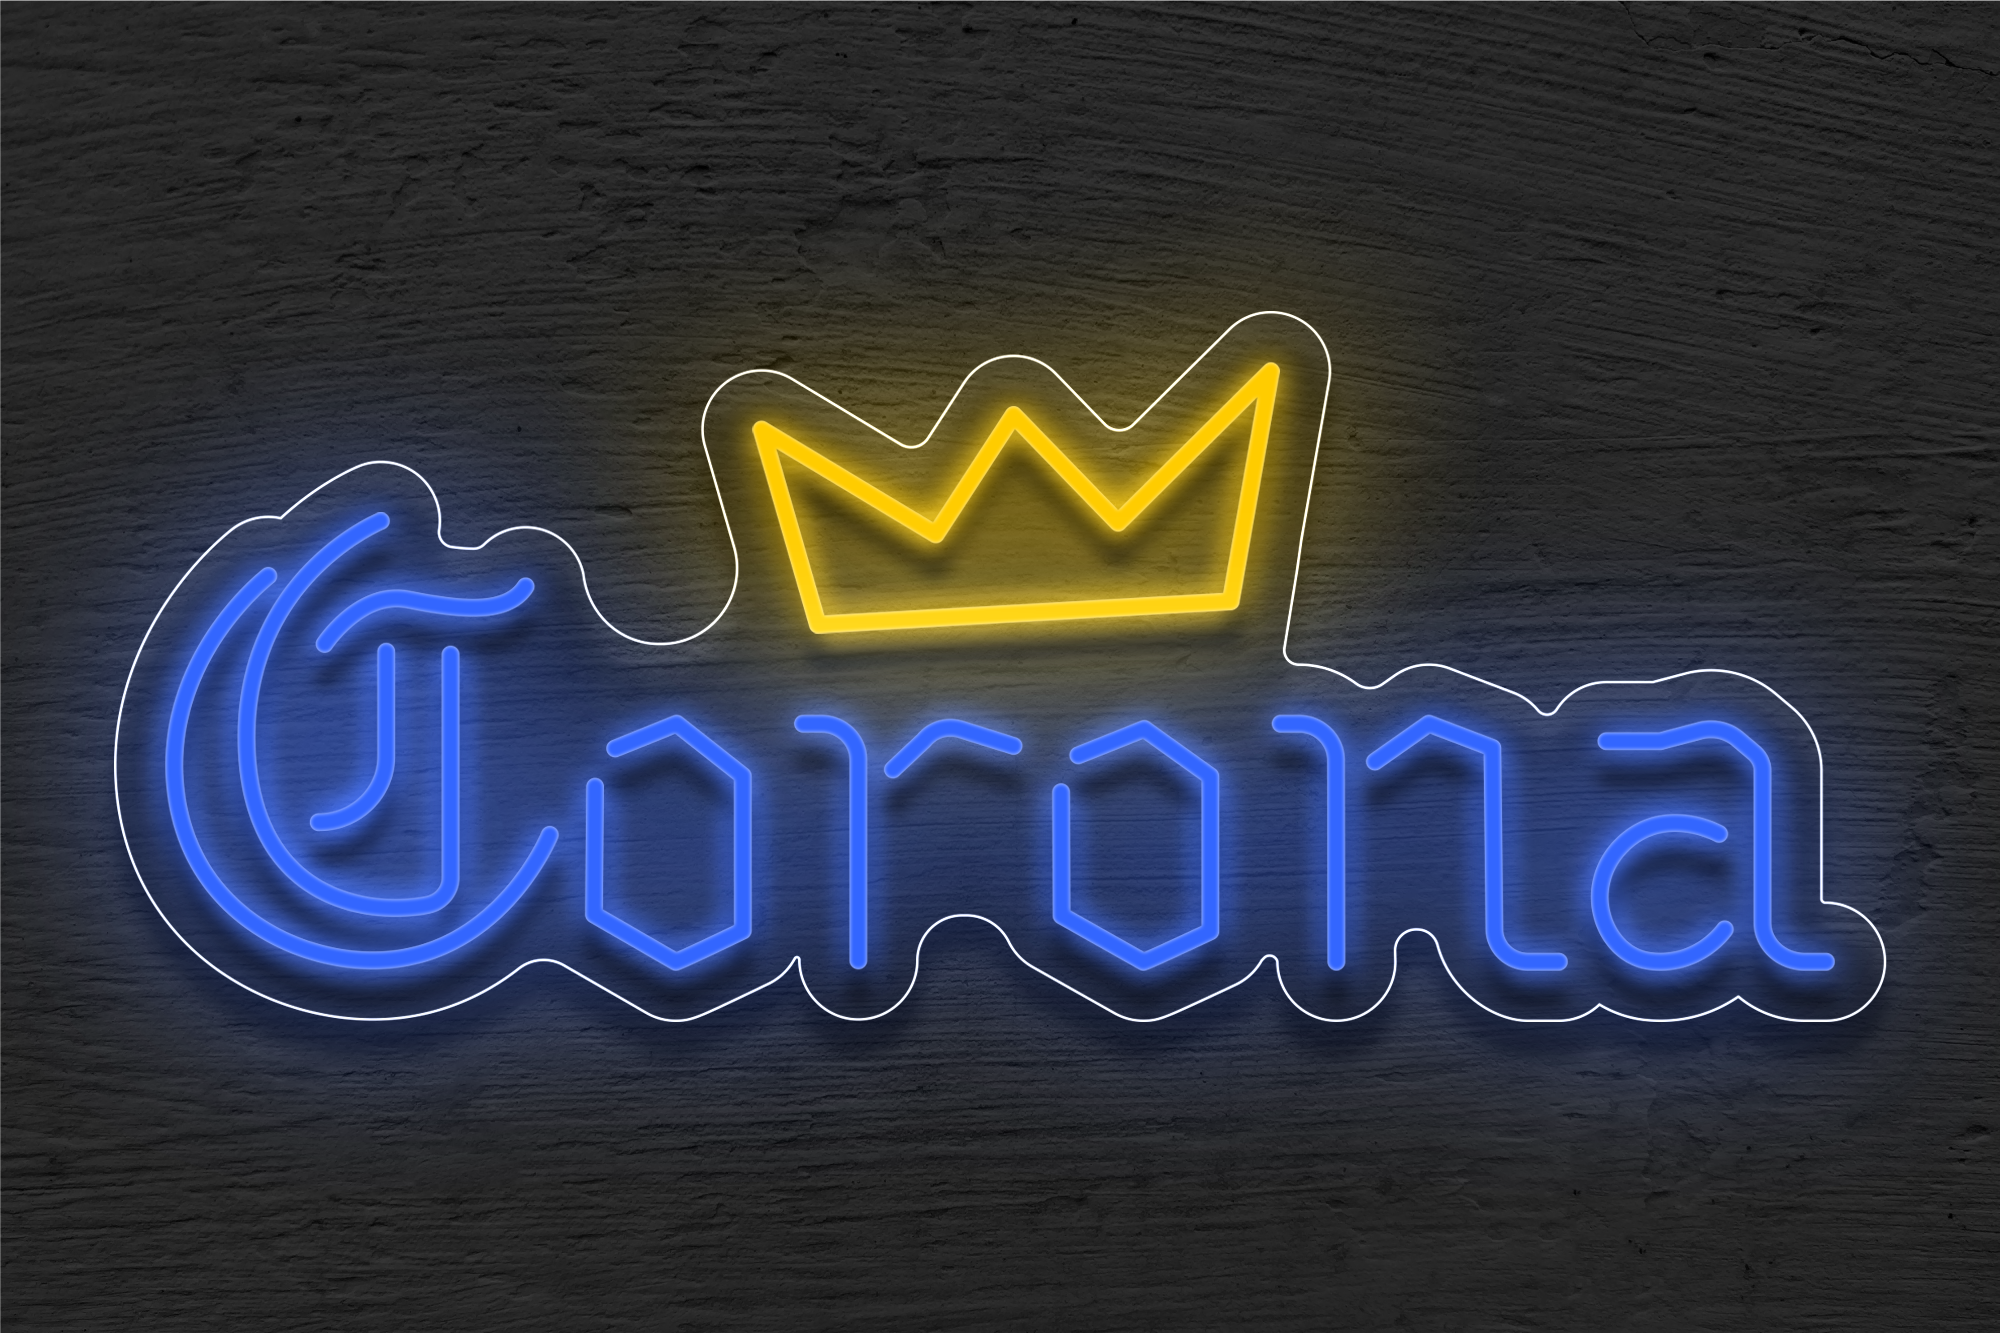 "Corona" with Crown LED Neon Sign